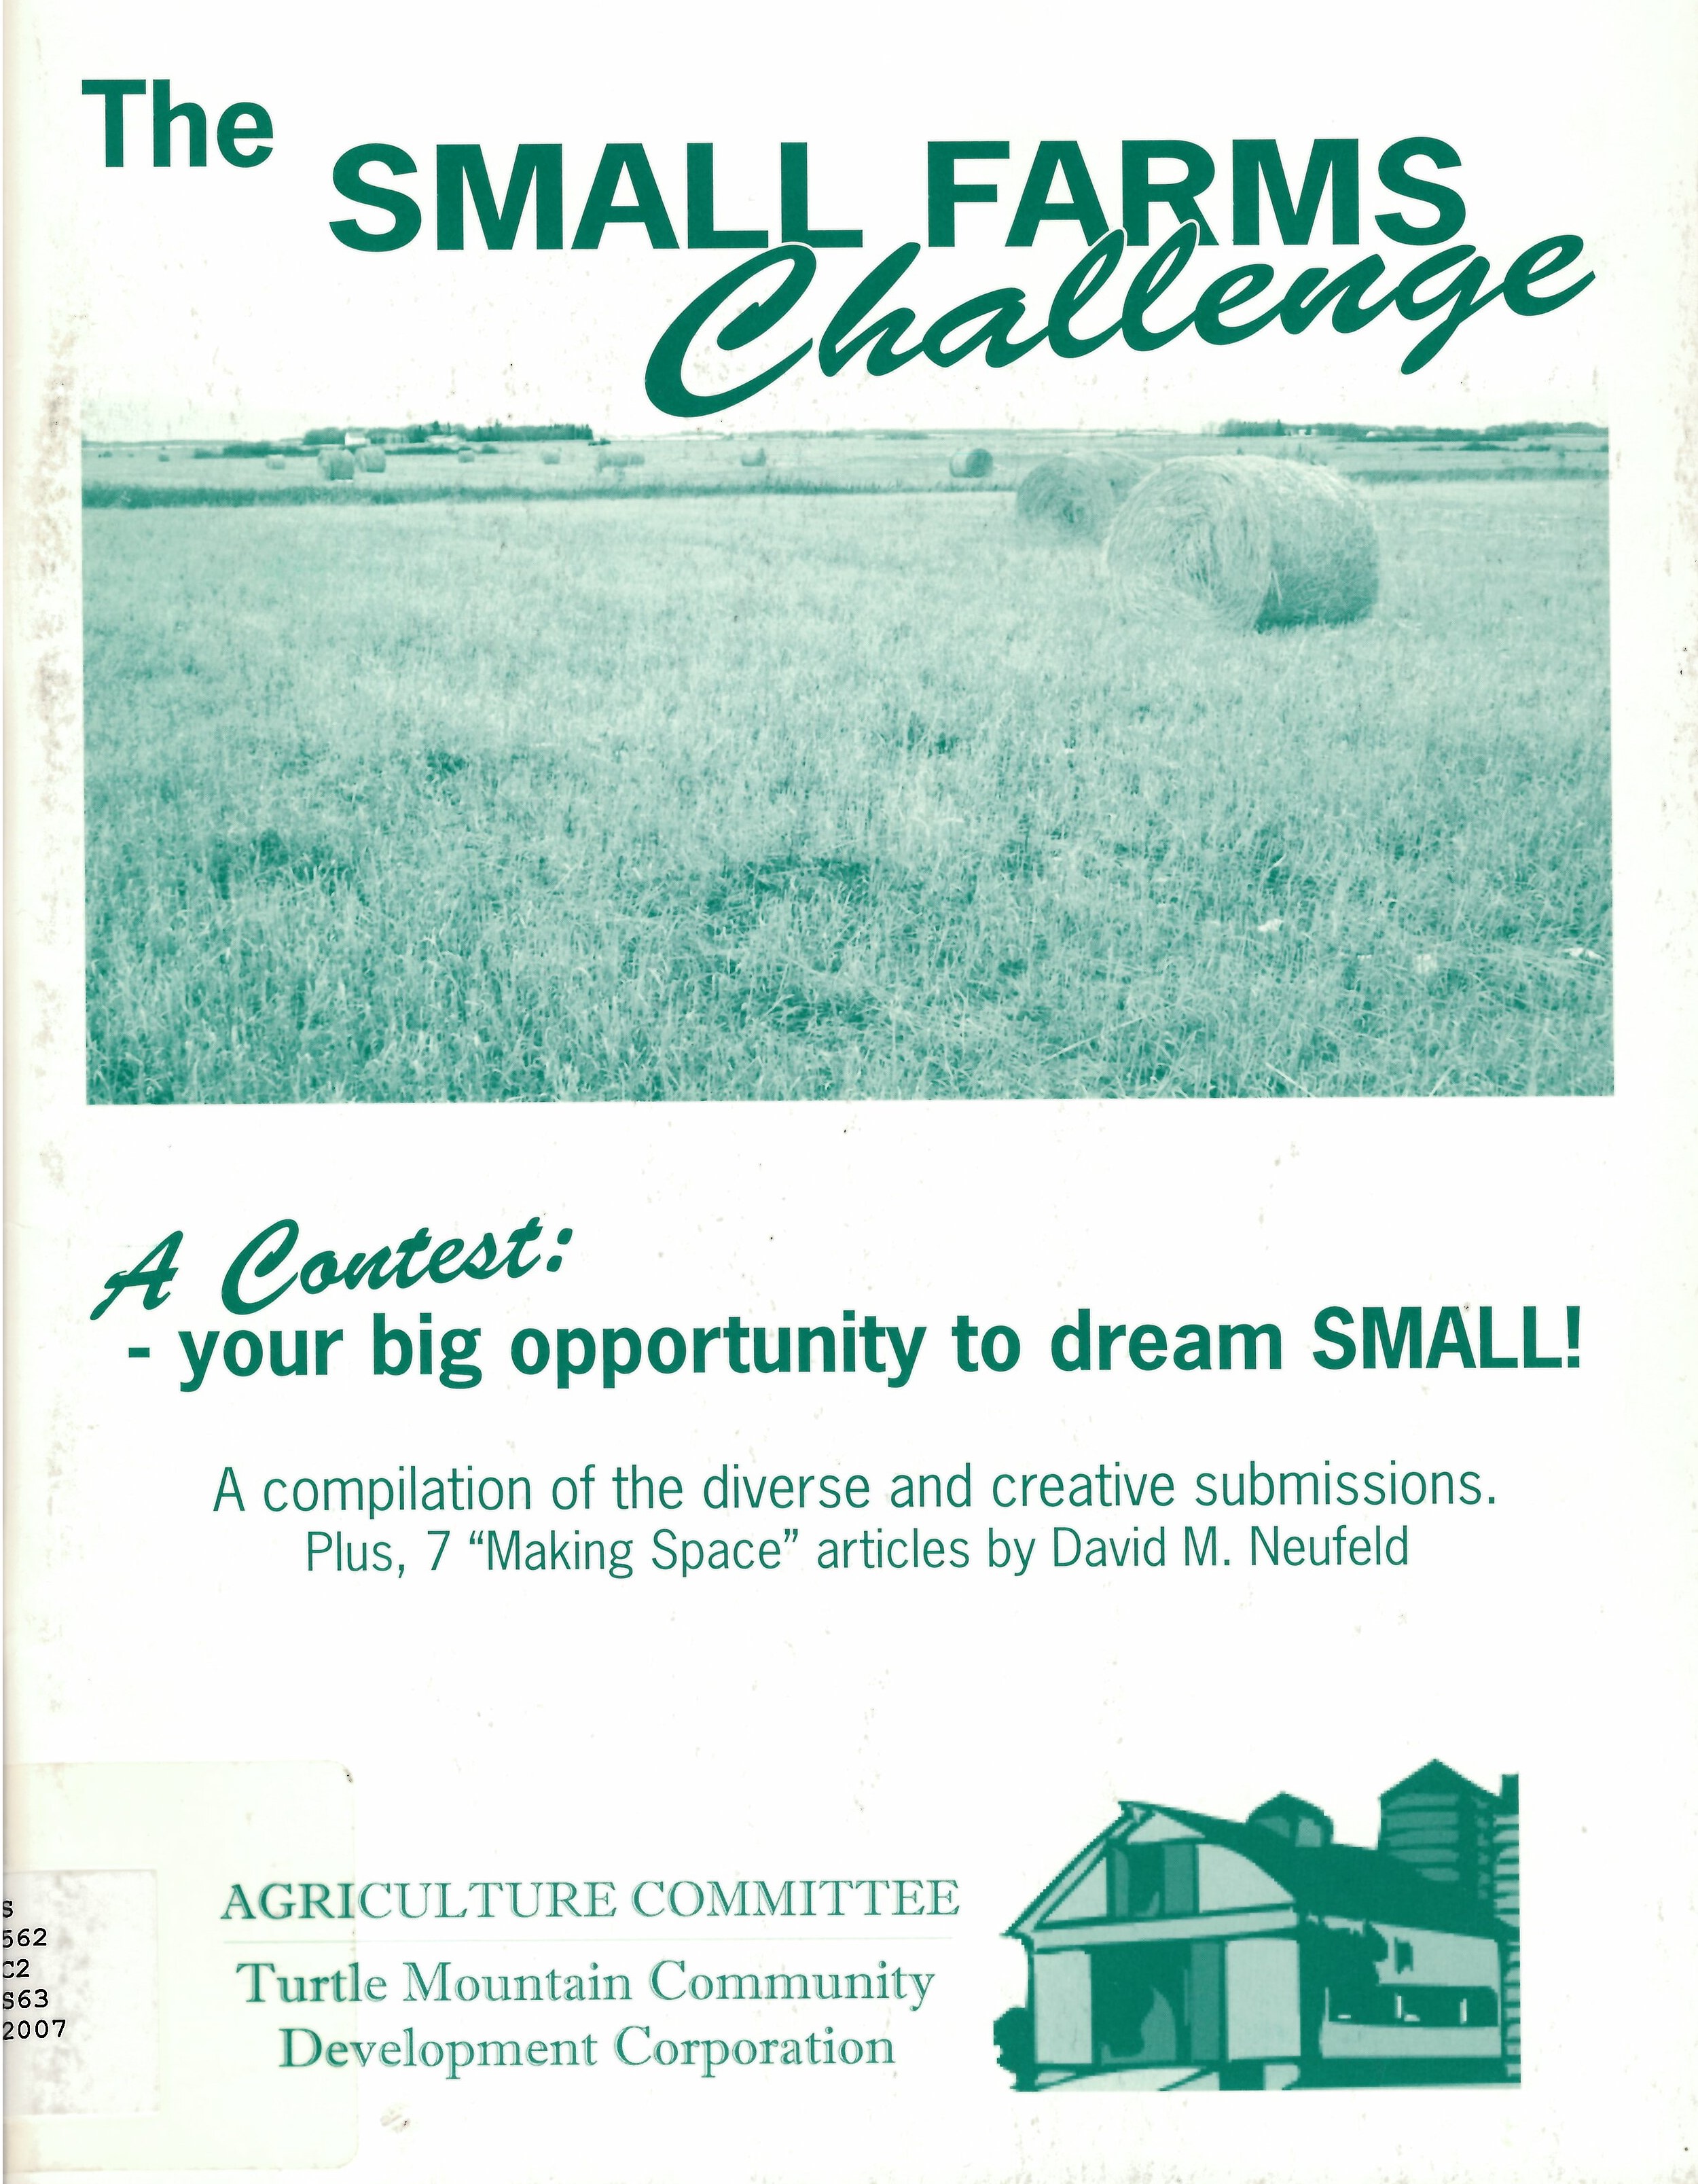 The small farms challenge : a contest - your big opportunity to dream small! : a compilation of the diverse and creative submissions